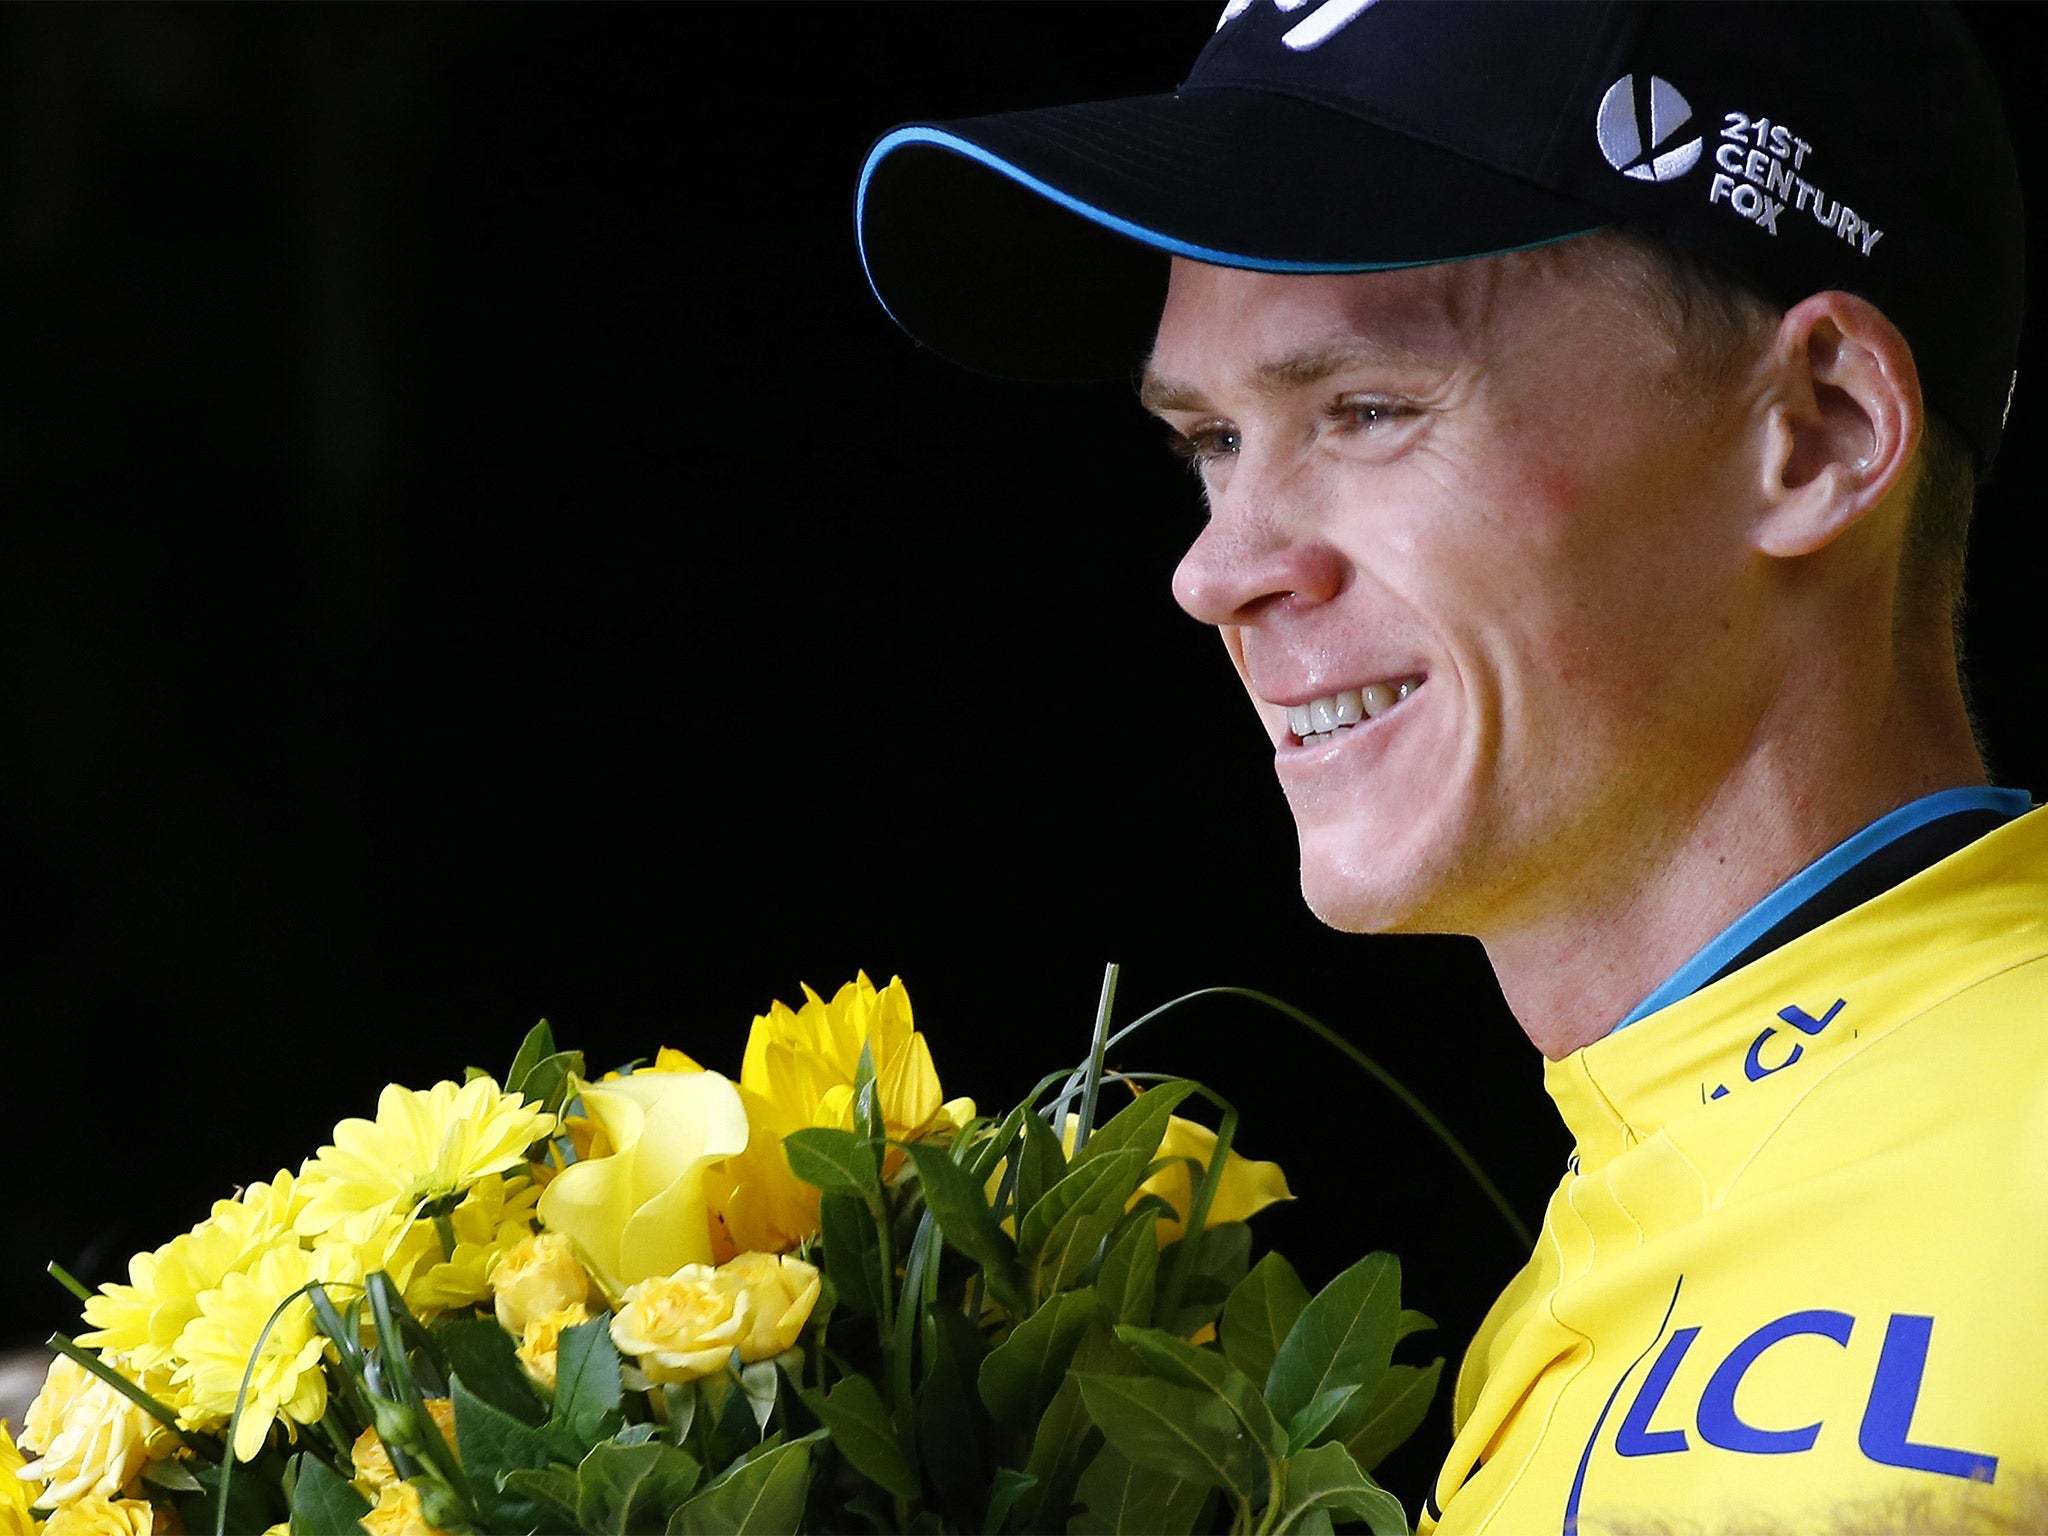 Froome is all smiles after retaining the yellow jersey - and his lead of over three minutes - on Wednesday